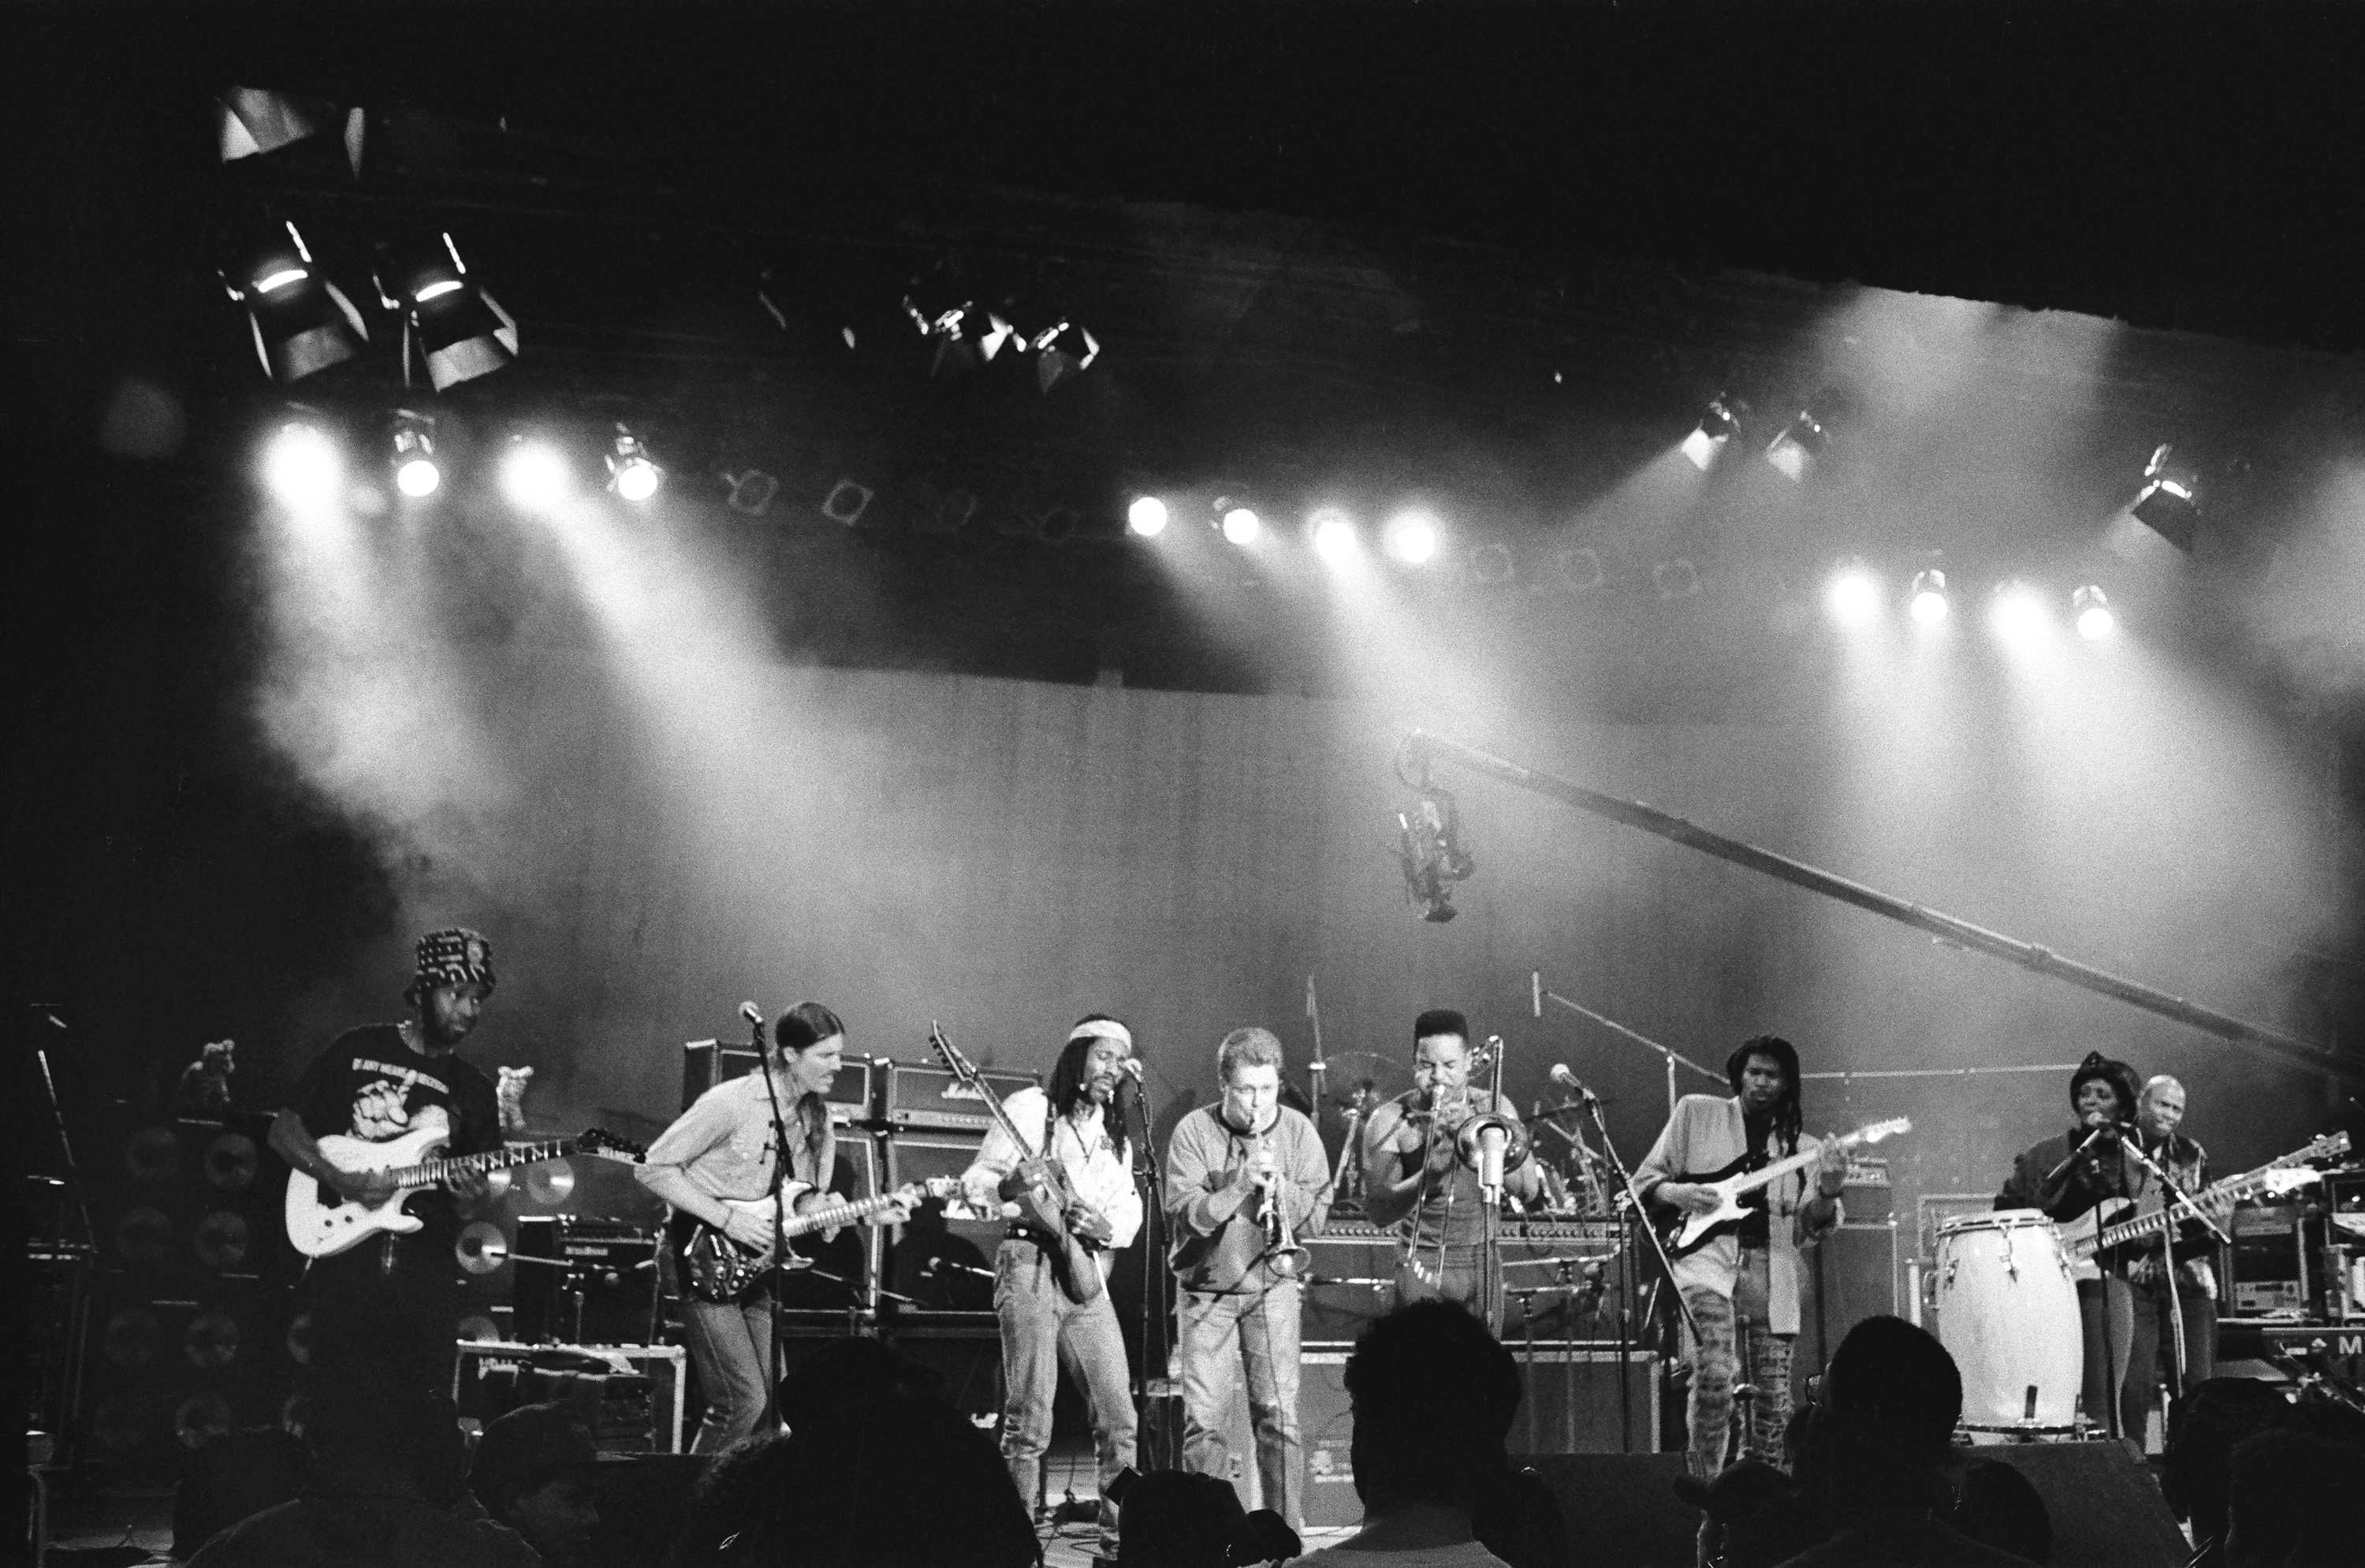 Black Rock Coalition members performing on stage in this black and white photograph.